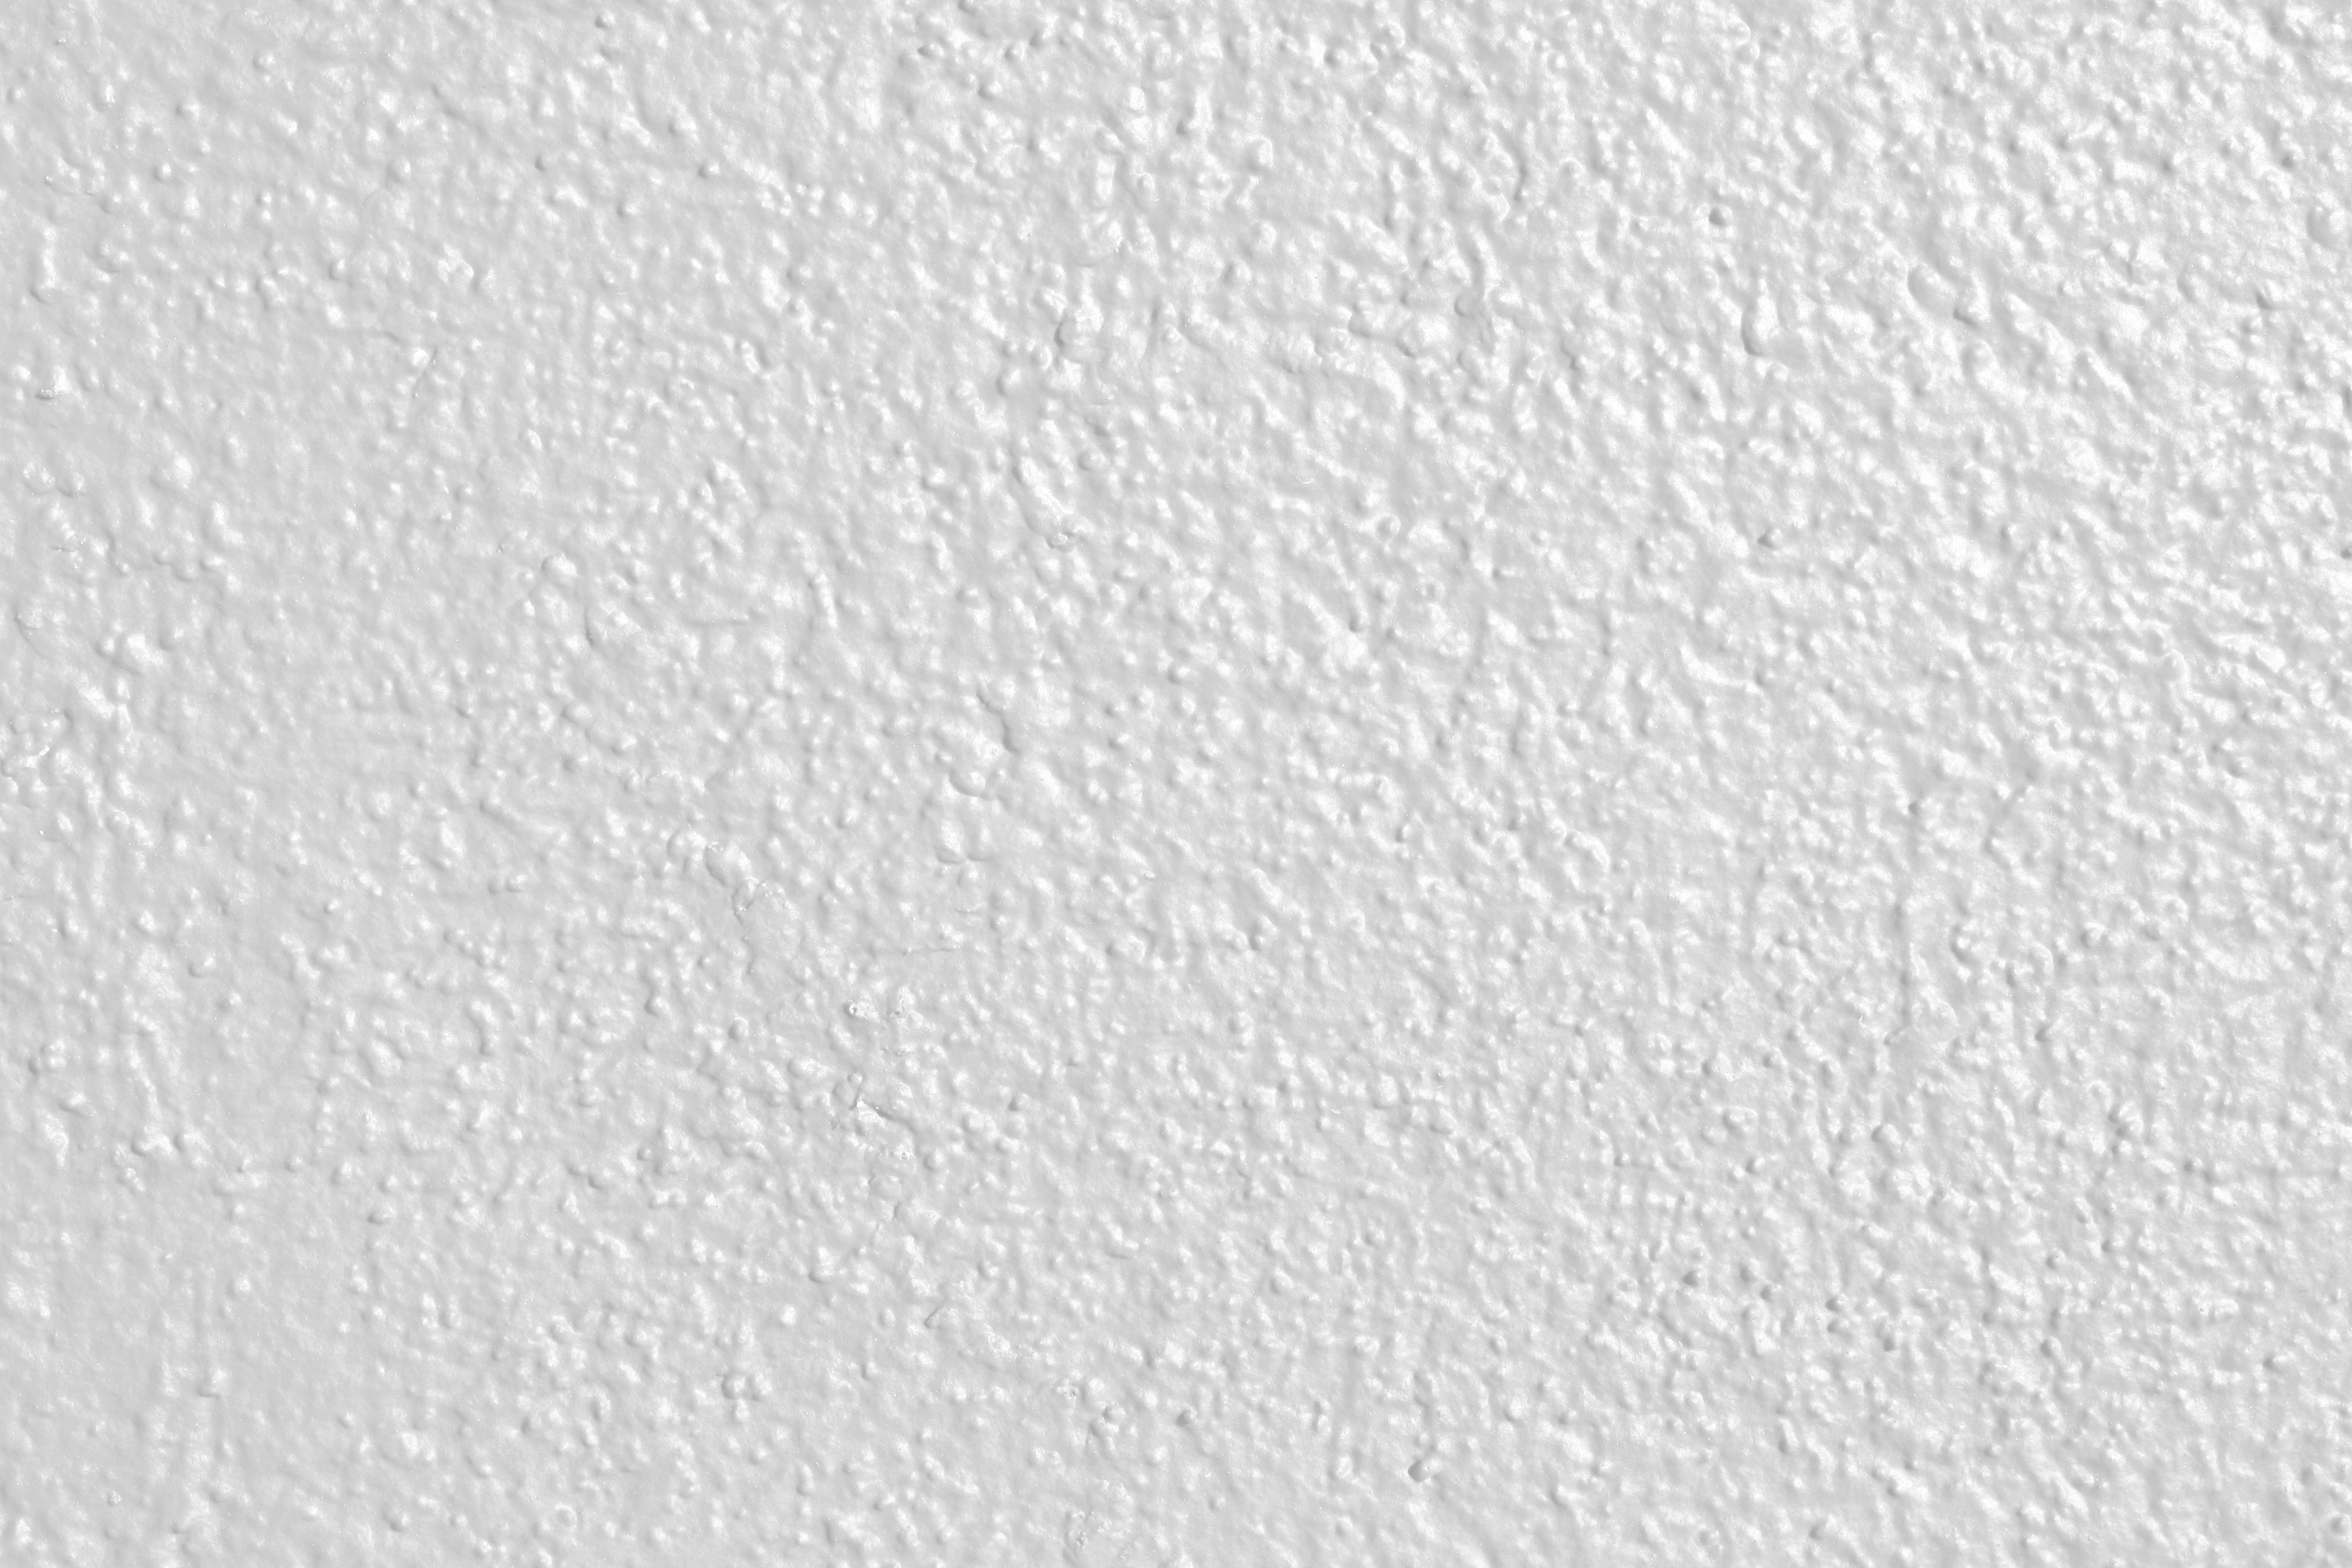 White Painted Wall Texture Picture | Free Photograph | Photos Public ...